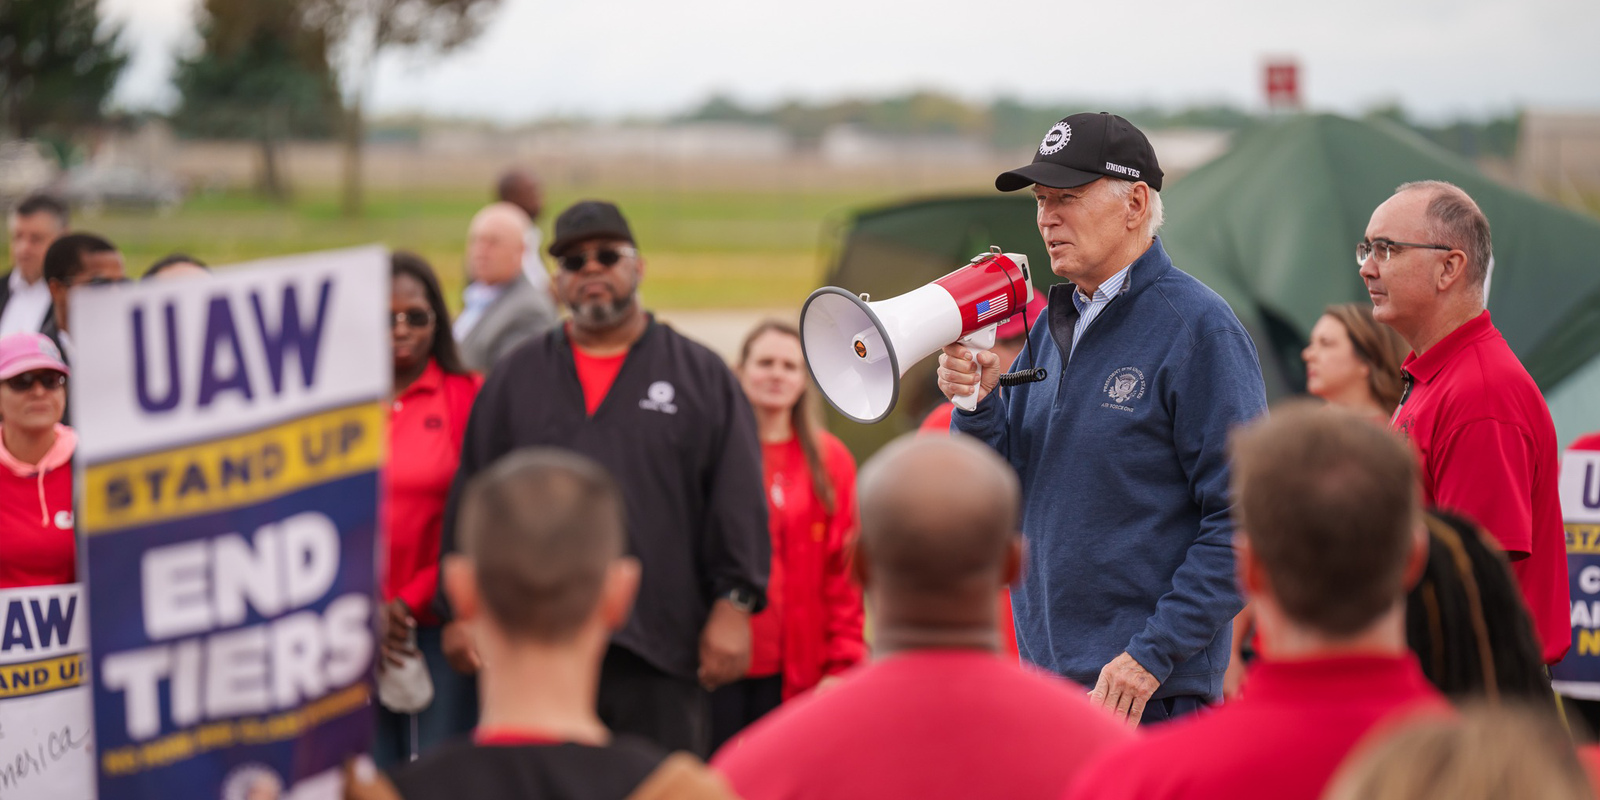  UAW workers on picket line get show of support from President Biden